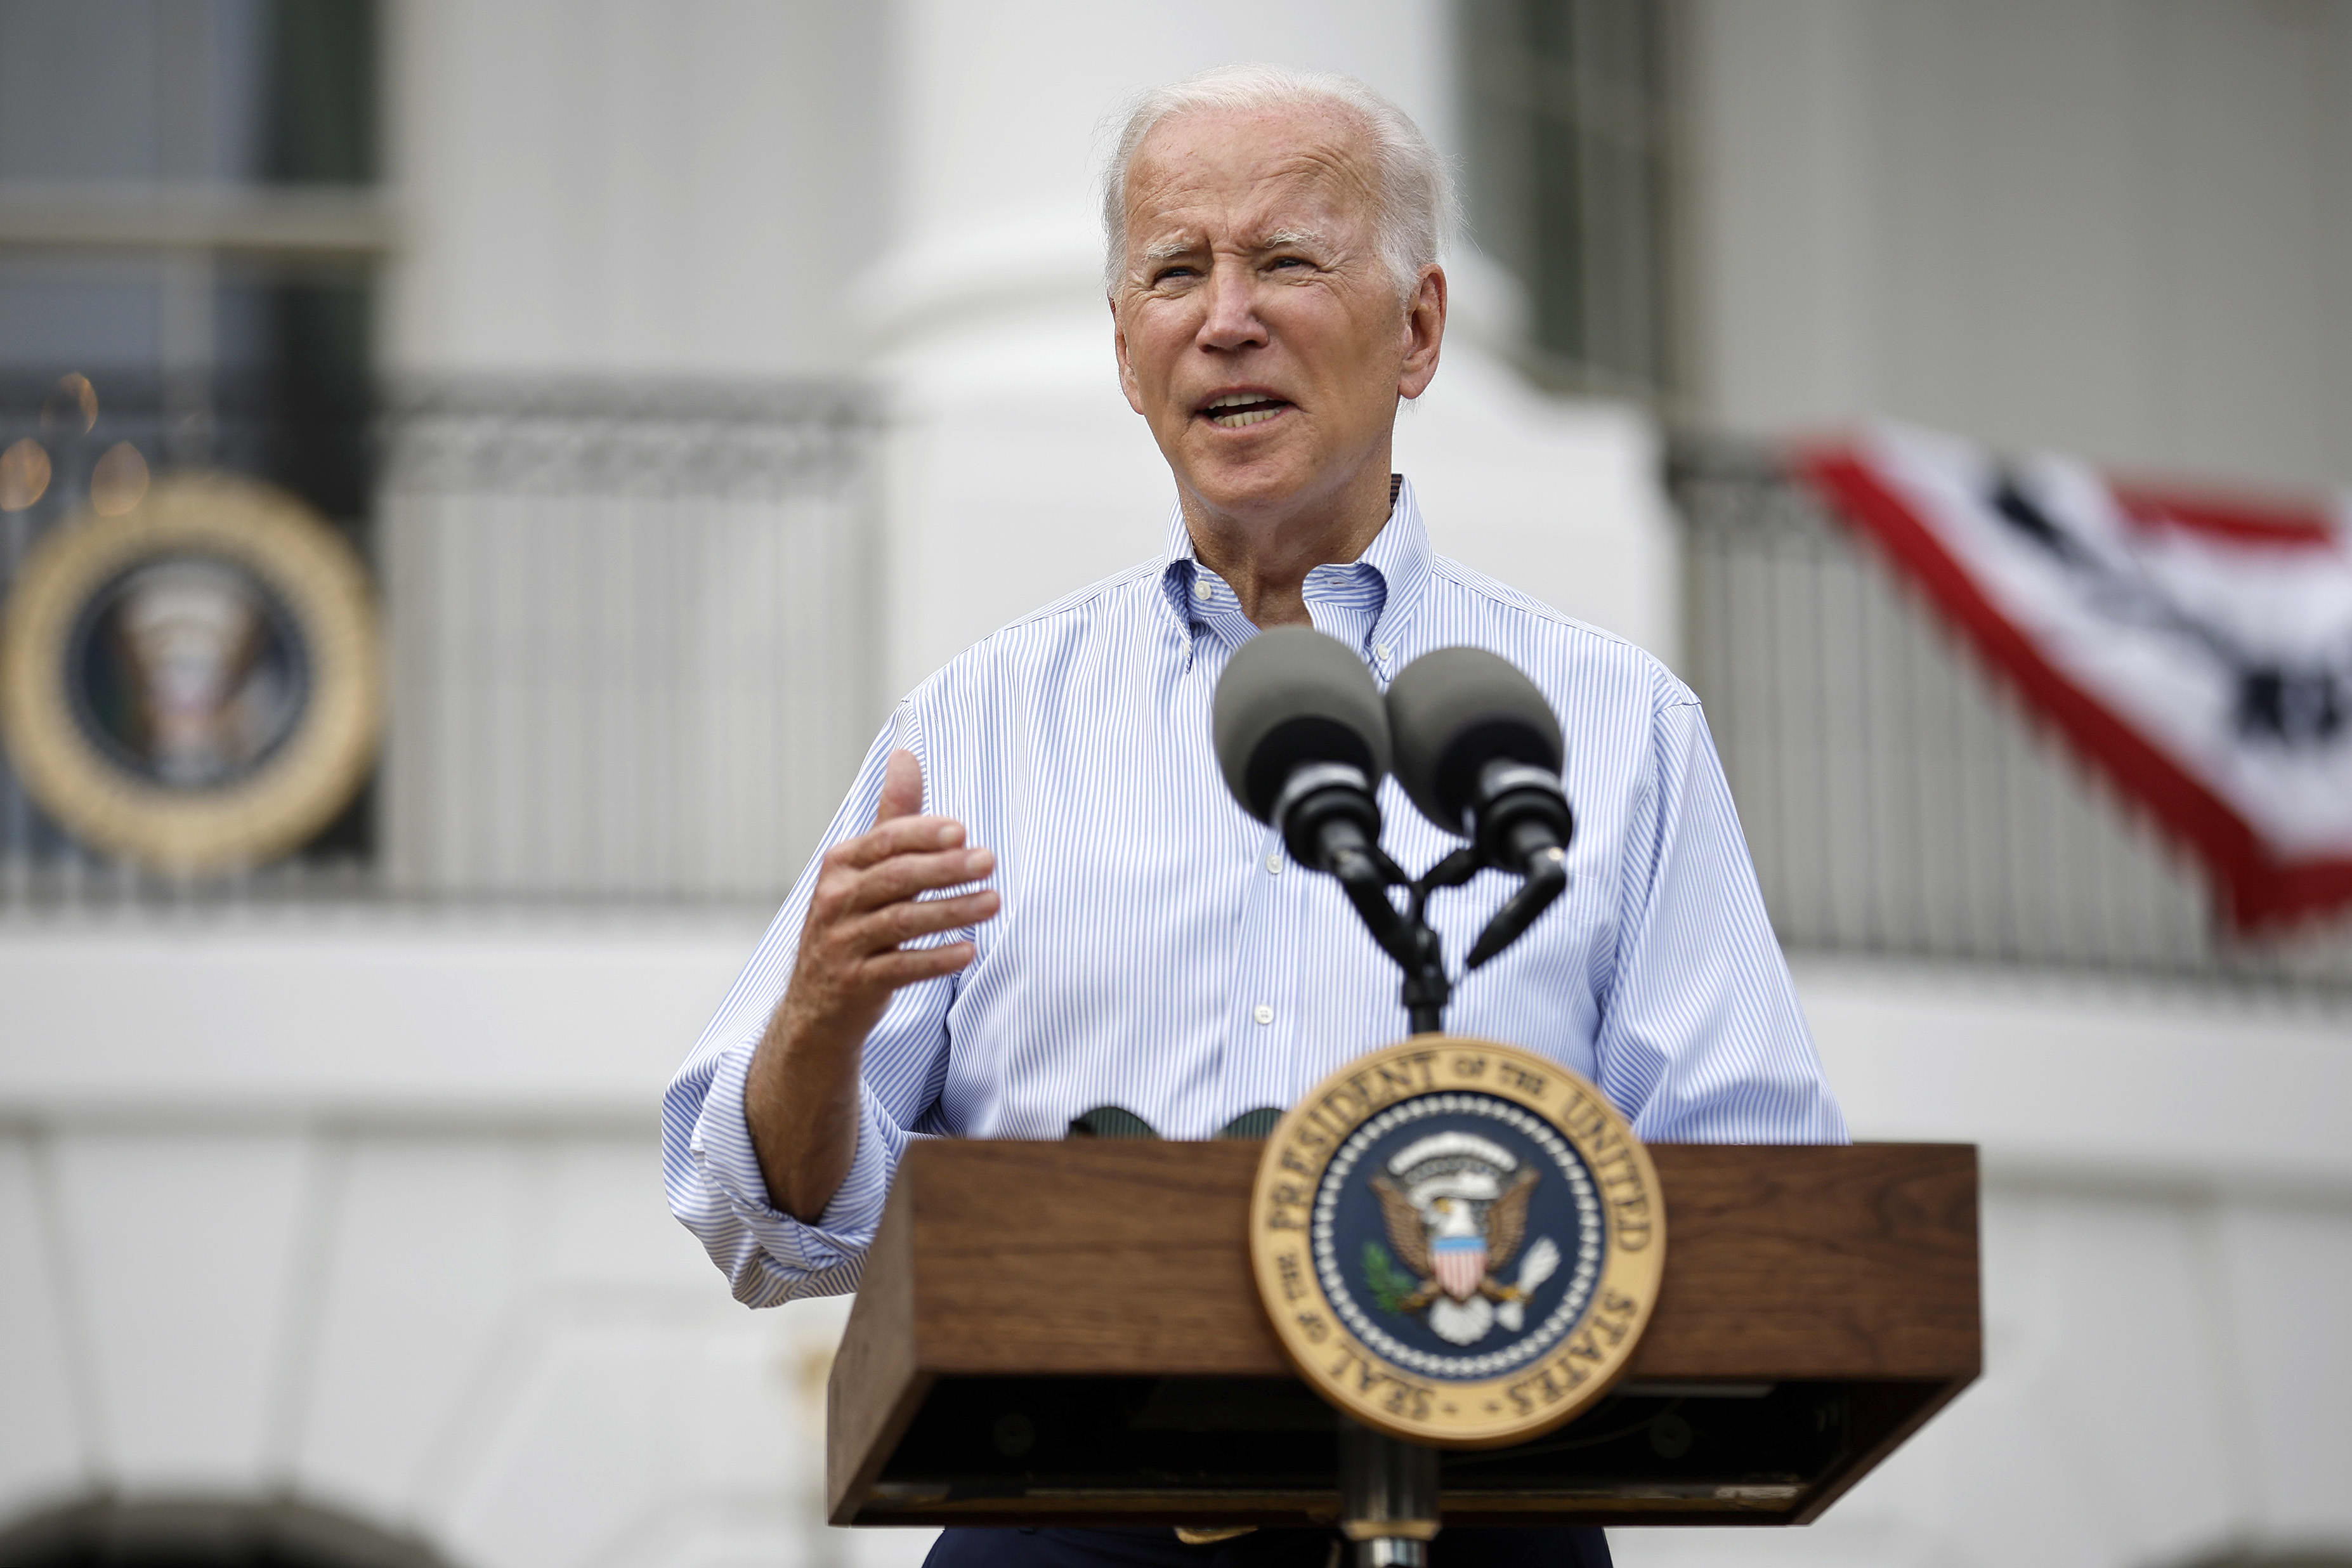 President Joe Biden on the South Lawn of the White House on July 12, 2022.